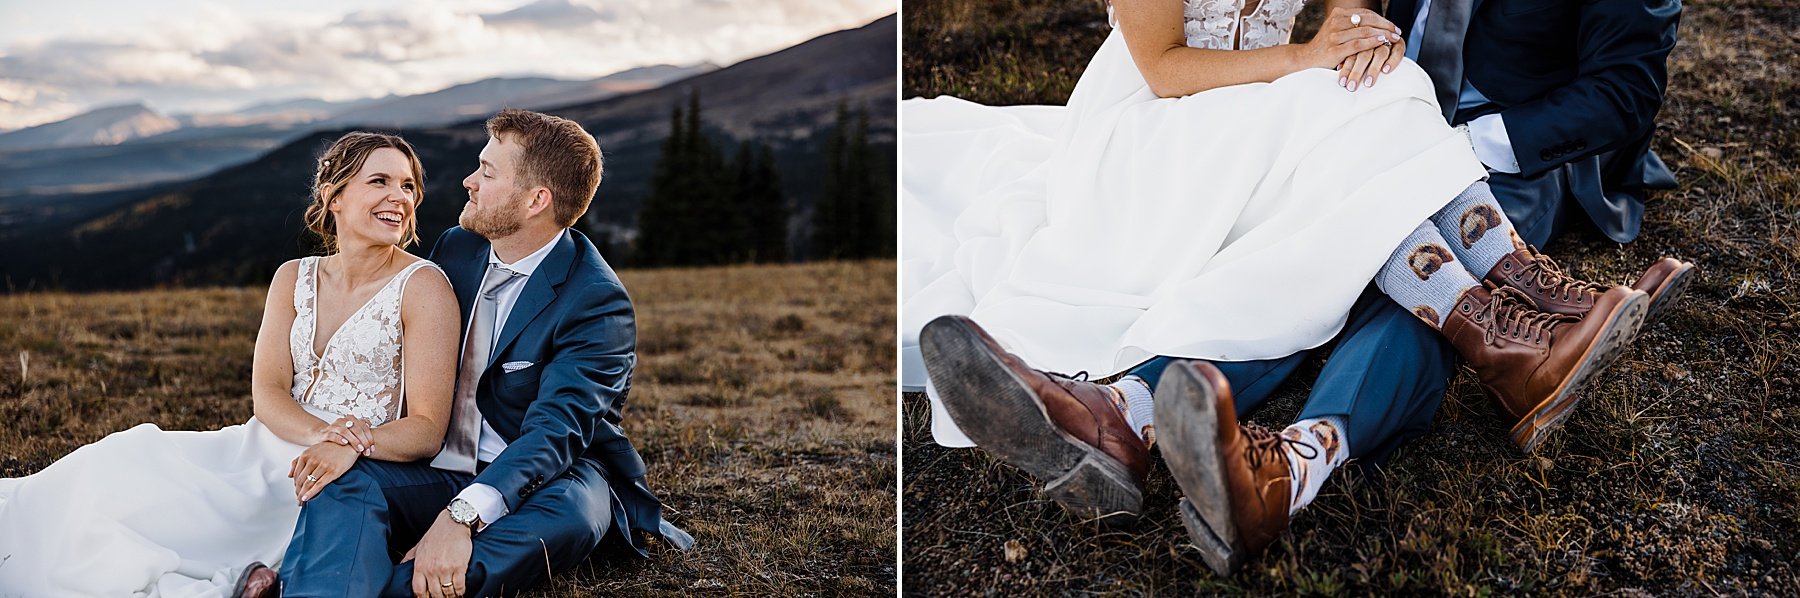 Fall Elopement at Sapphire Point Overlook in Breckenridge, Colorado